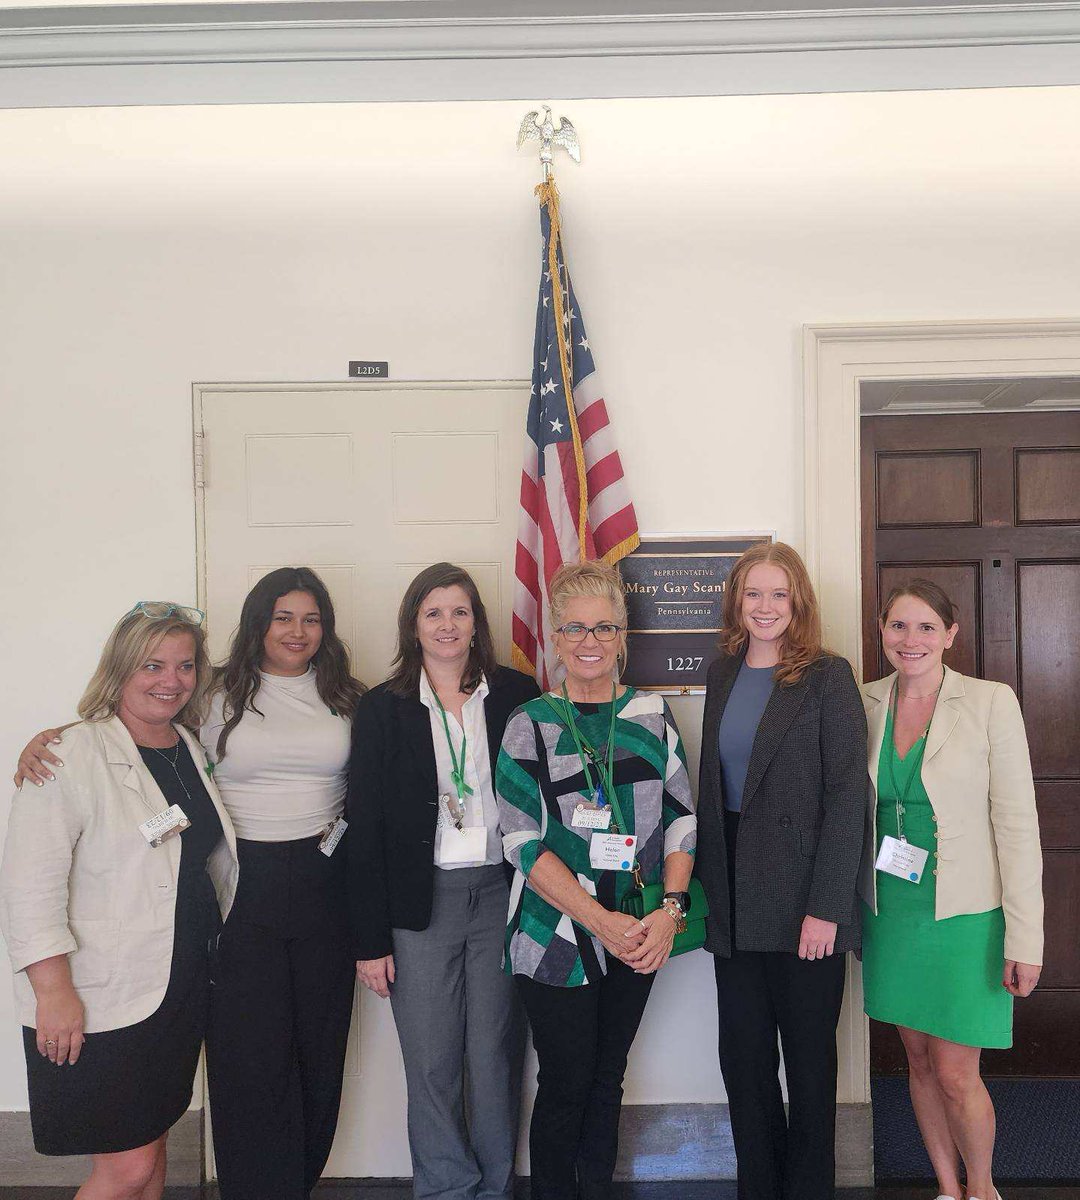 Thank you to @ToriDeleonardo from @RepSummerLee 's office for meeting with us yesterday to discuss #HR830 #SafeStepAct and #HR2360 #HELPCopaysAct
@AFAdvocacy @ArthritisFdn #ArthritisAdvocacySummit23